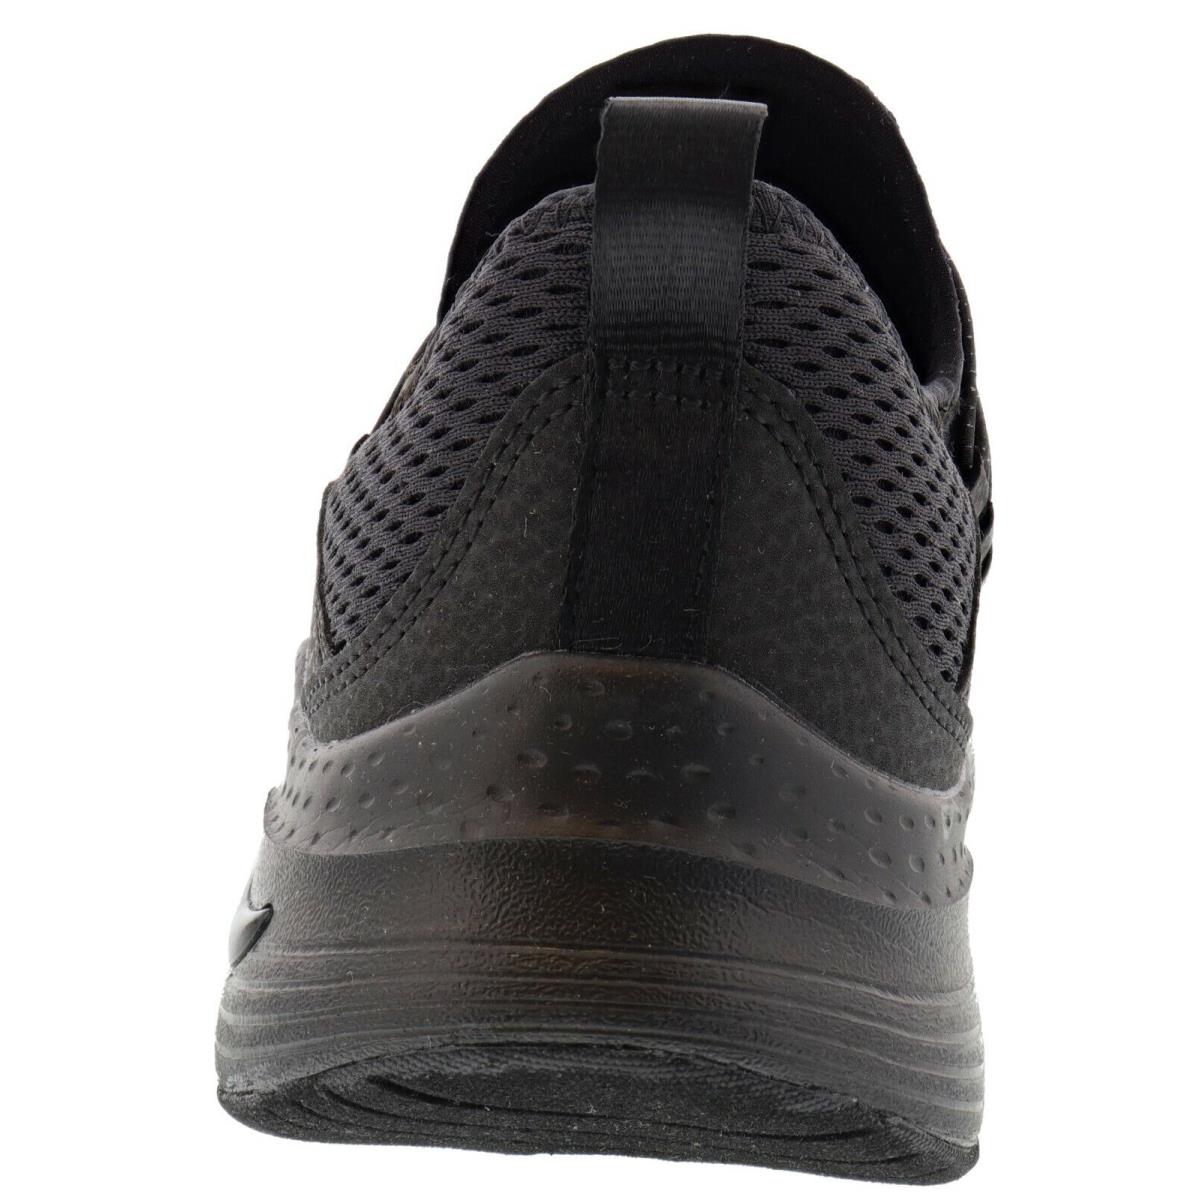 Skechers shoes ARCH LUCKY THOUGHTS - BLACK / BLACK 2